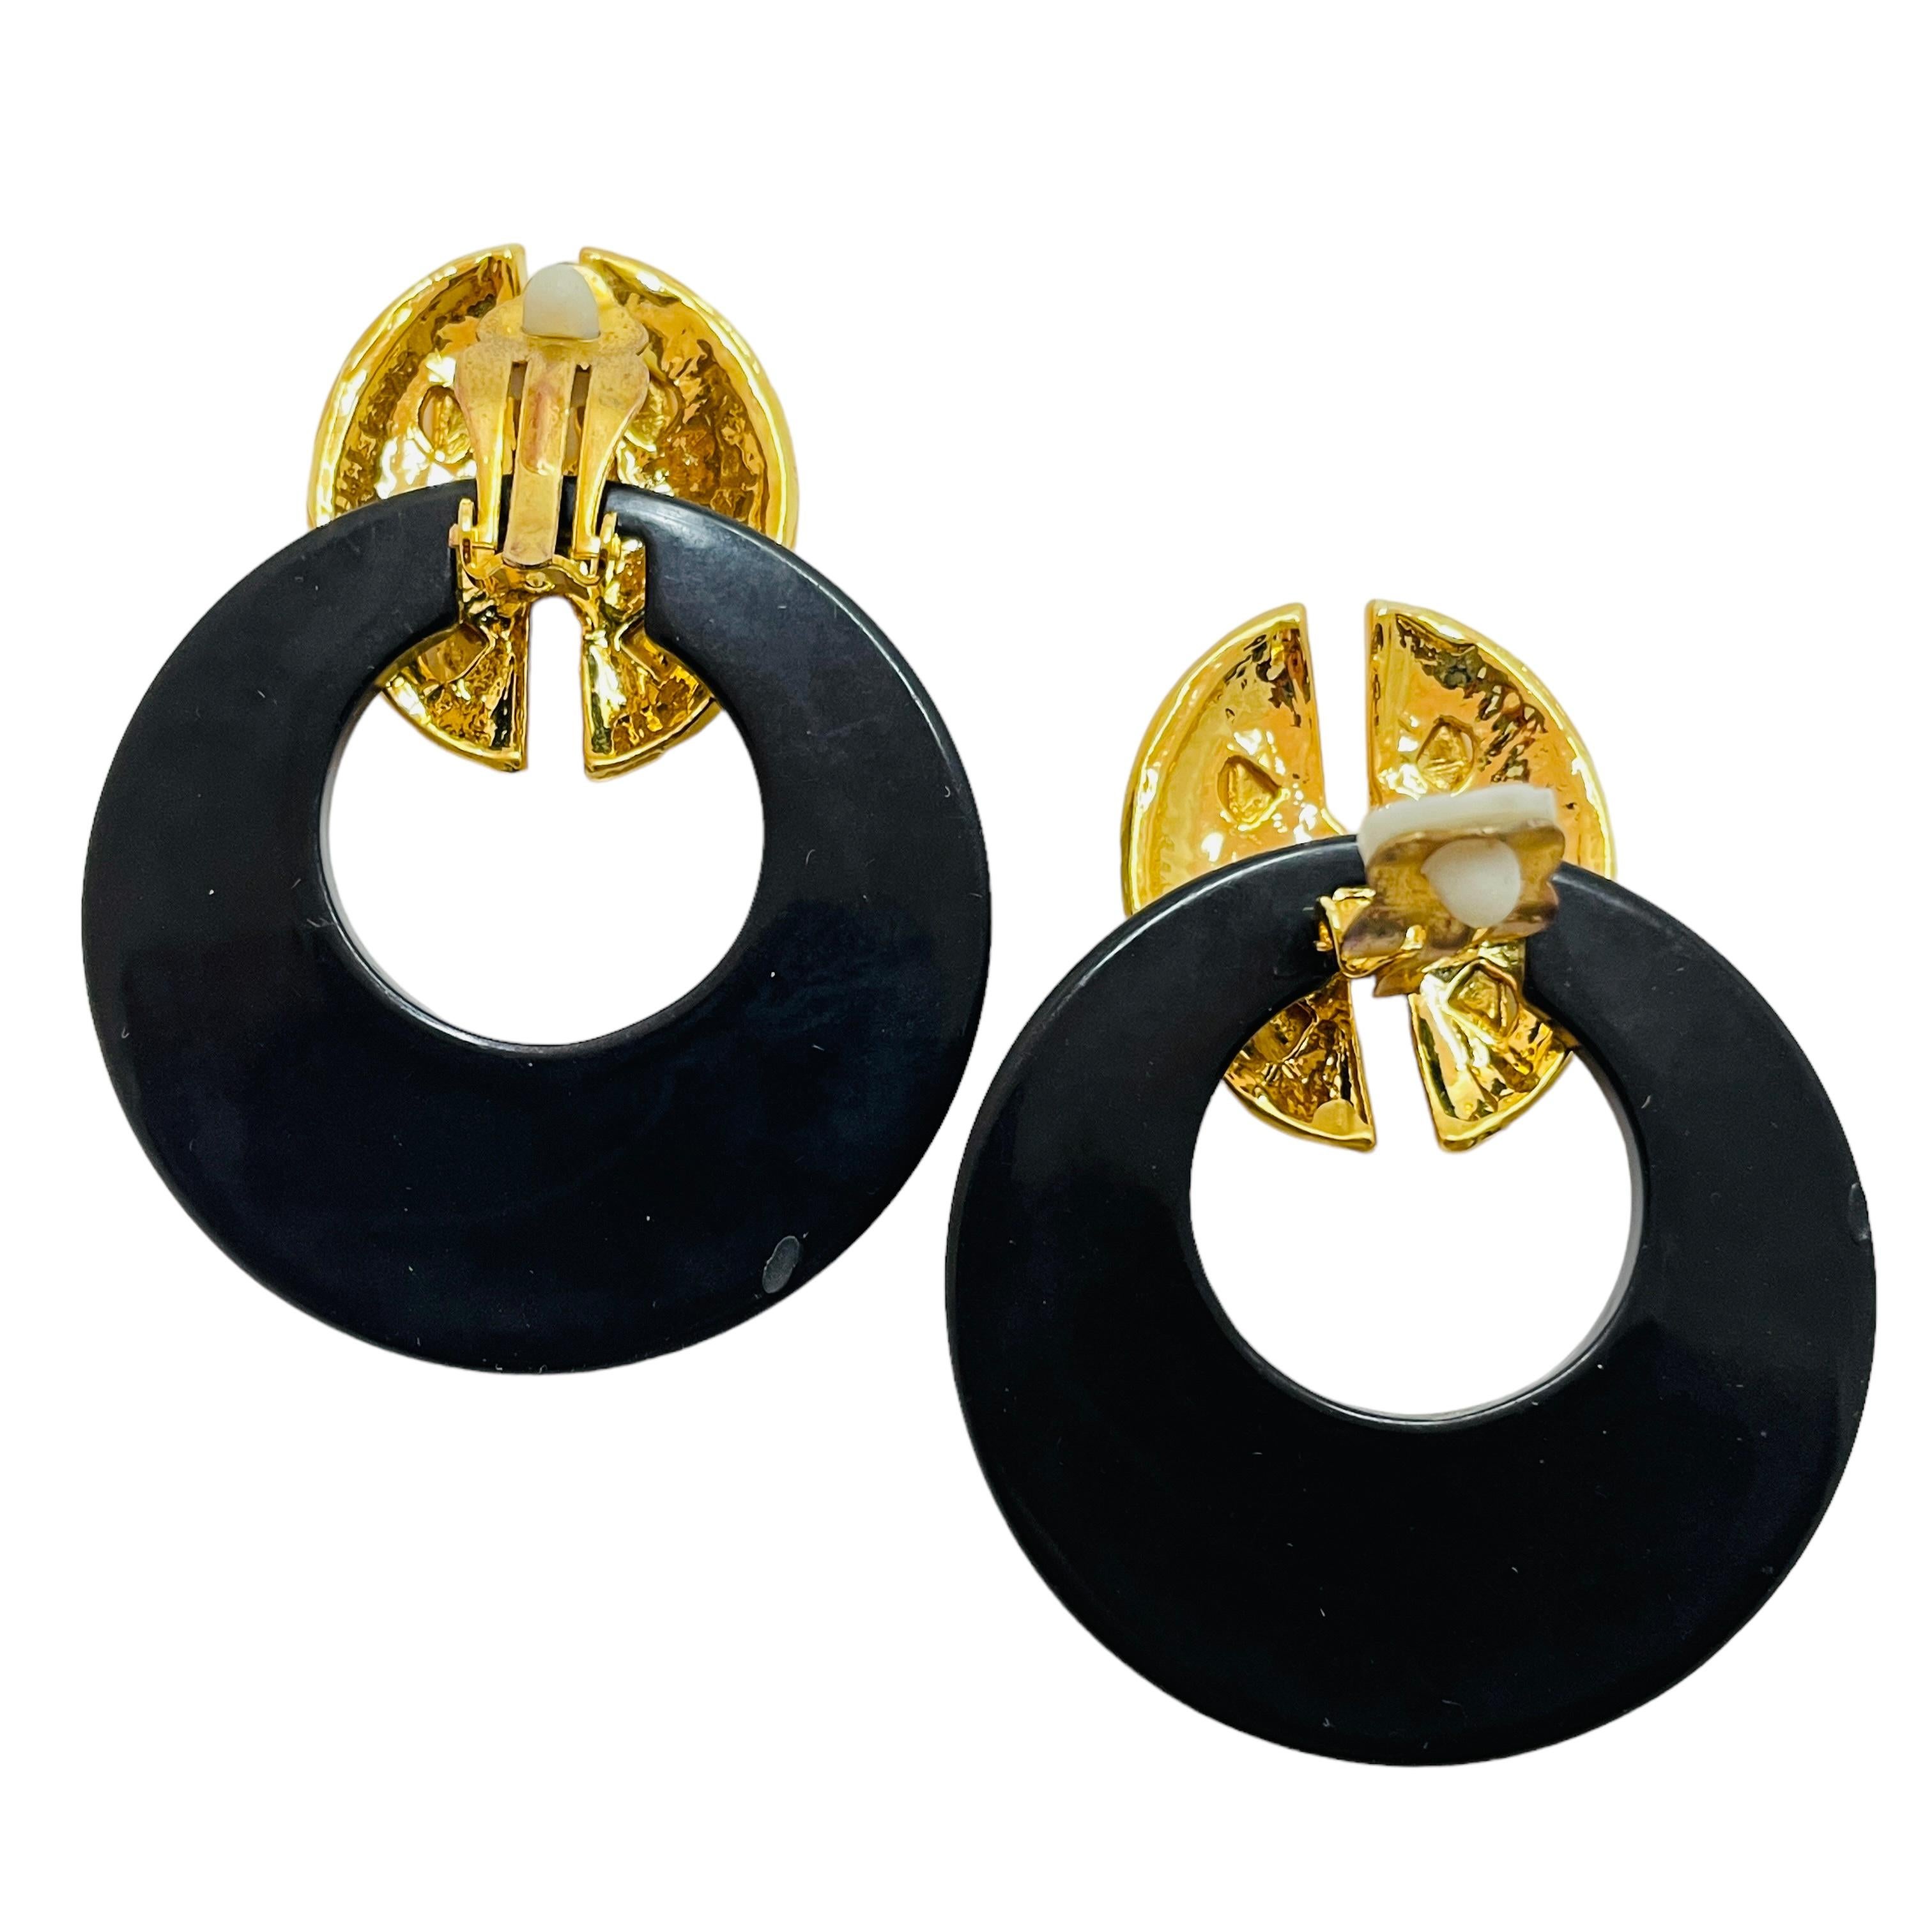 Vintage gold black door knocker clip on earrings In Excellent Condition For Sale In Palos Hills, IL